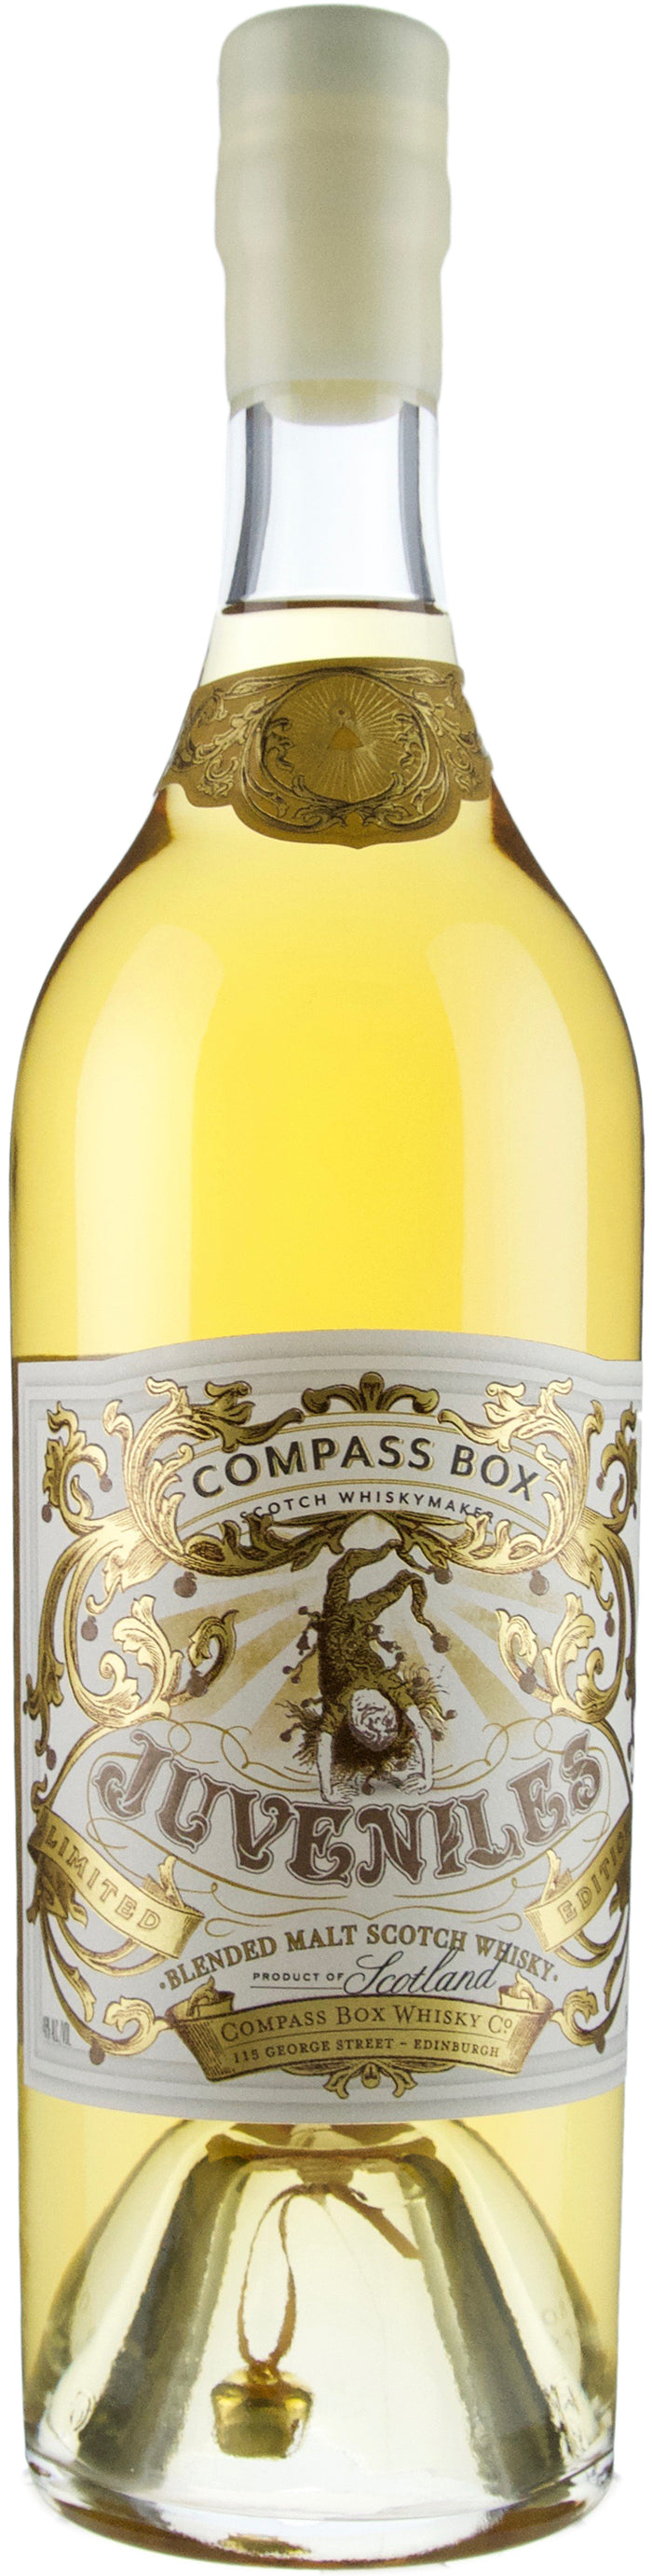 Compass Box Juveniles 2018 Limited Edition Blended Malt Scotch Whiskey